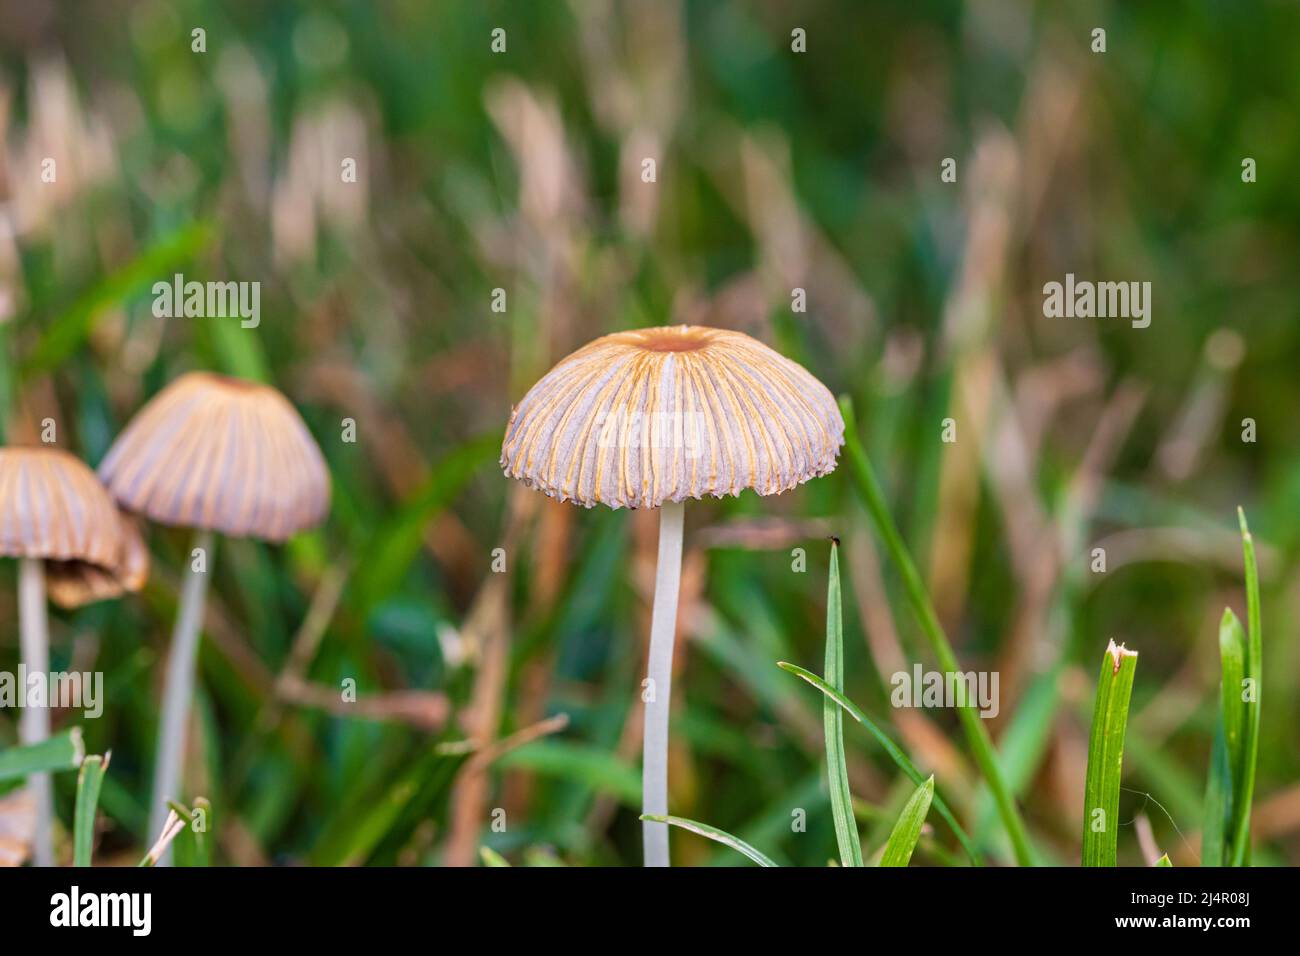 Closeup of mushrooms growing in yard. Lawn care, pet health and safety concept Stock Photo